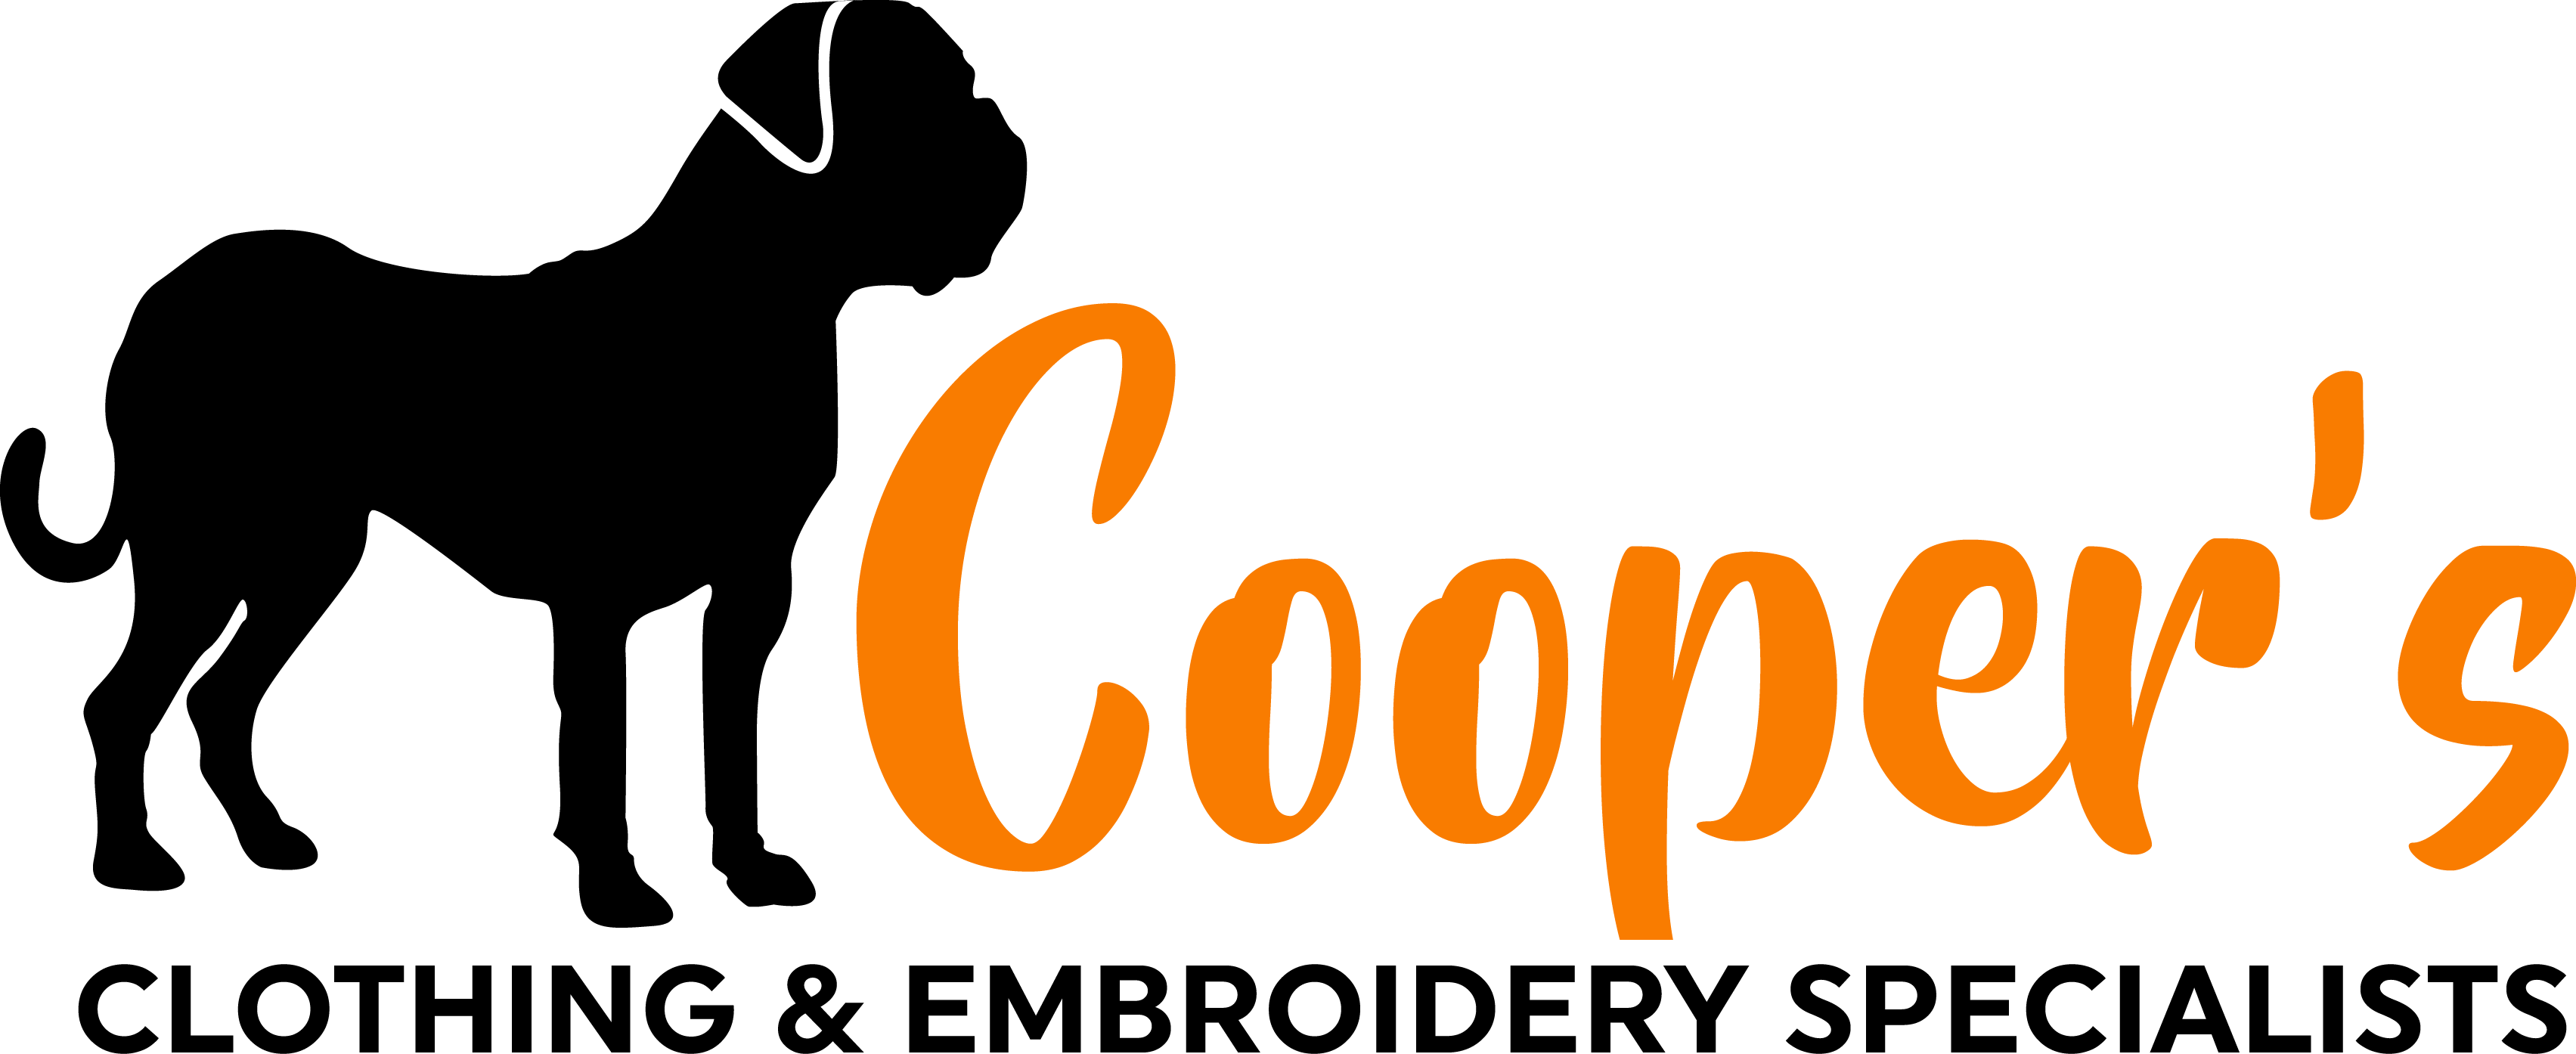 Coopers Clothing And Embroidery Specialists Ltd